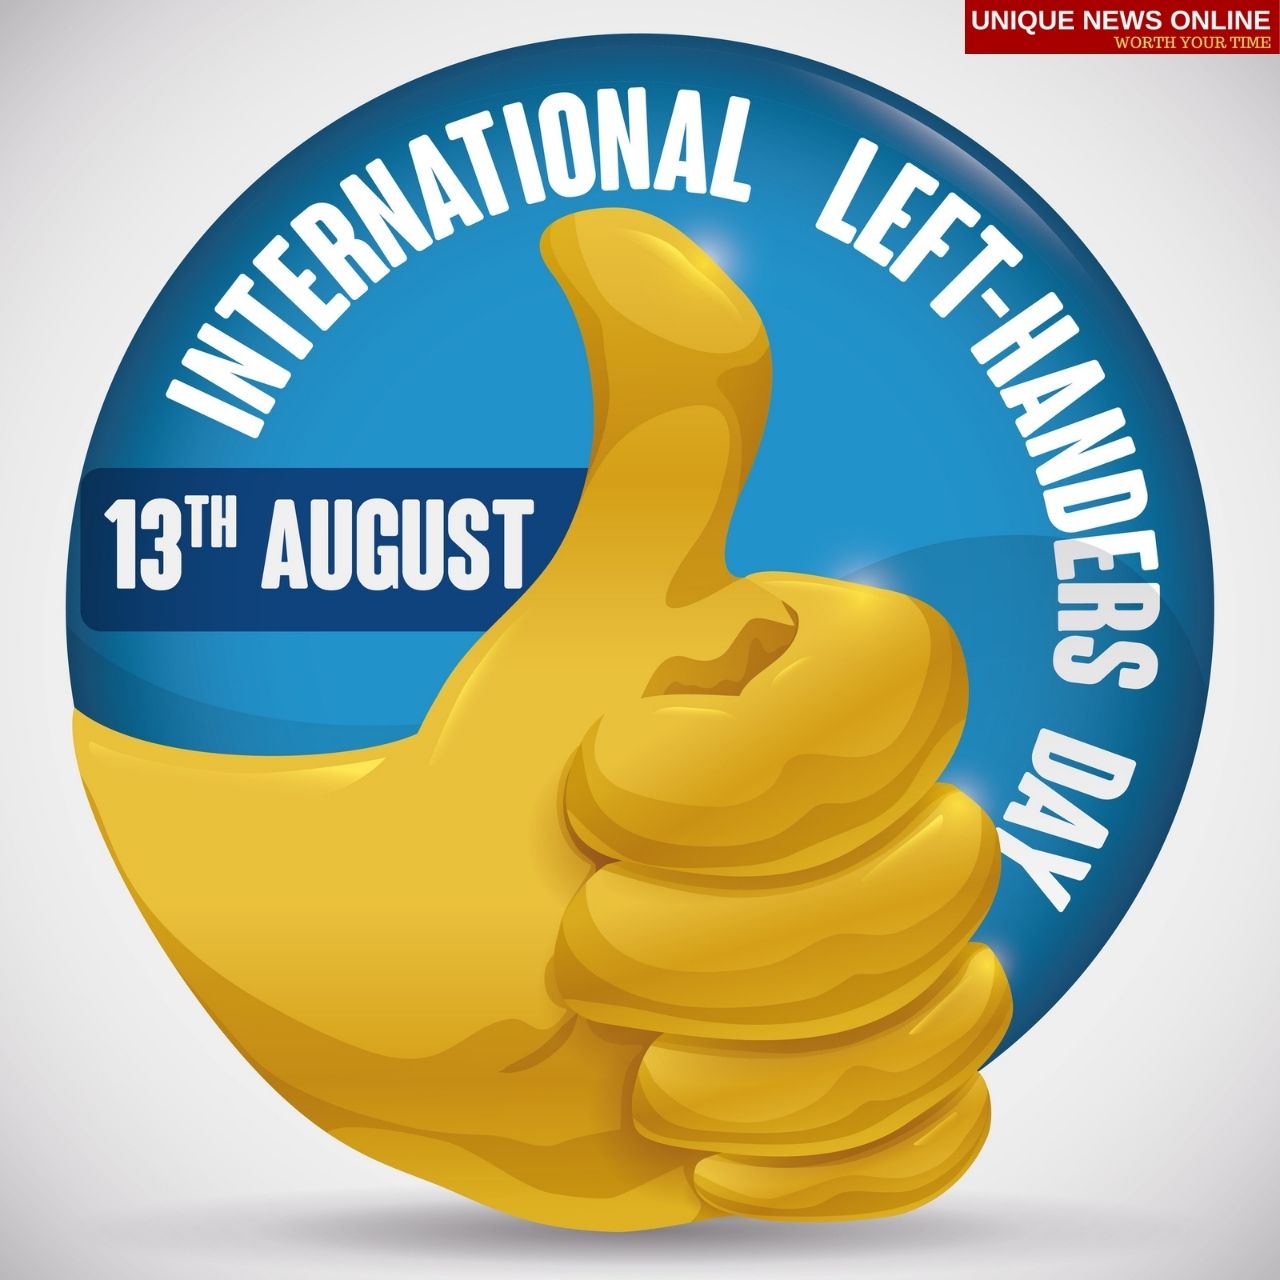 International Lefthanders Day 2021 Quotes, Wishes, HD Images, Memes, GIf, Greetings, and Messages to Share